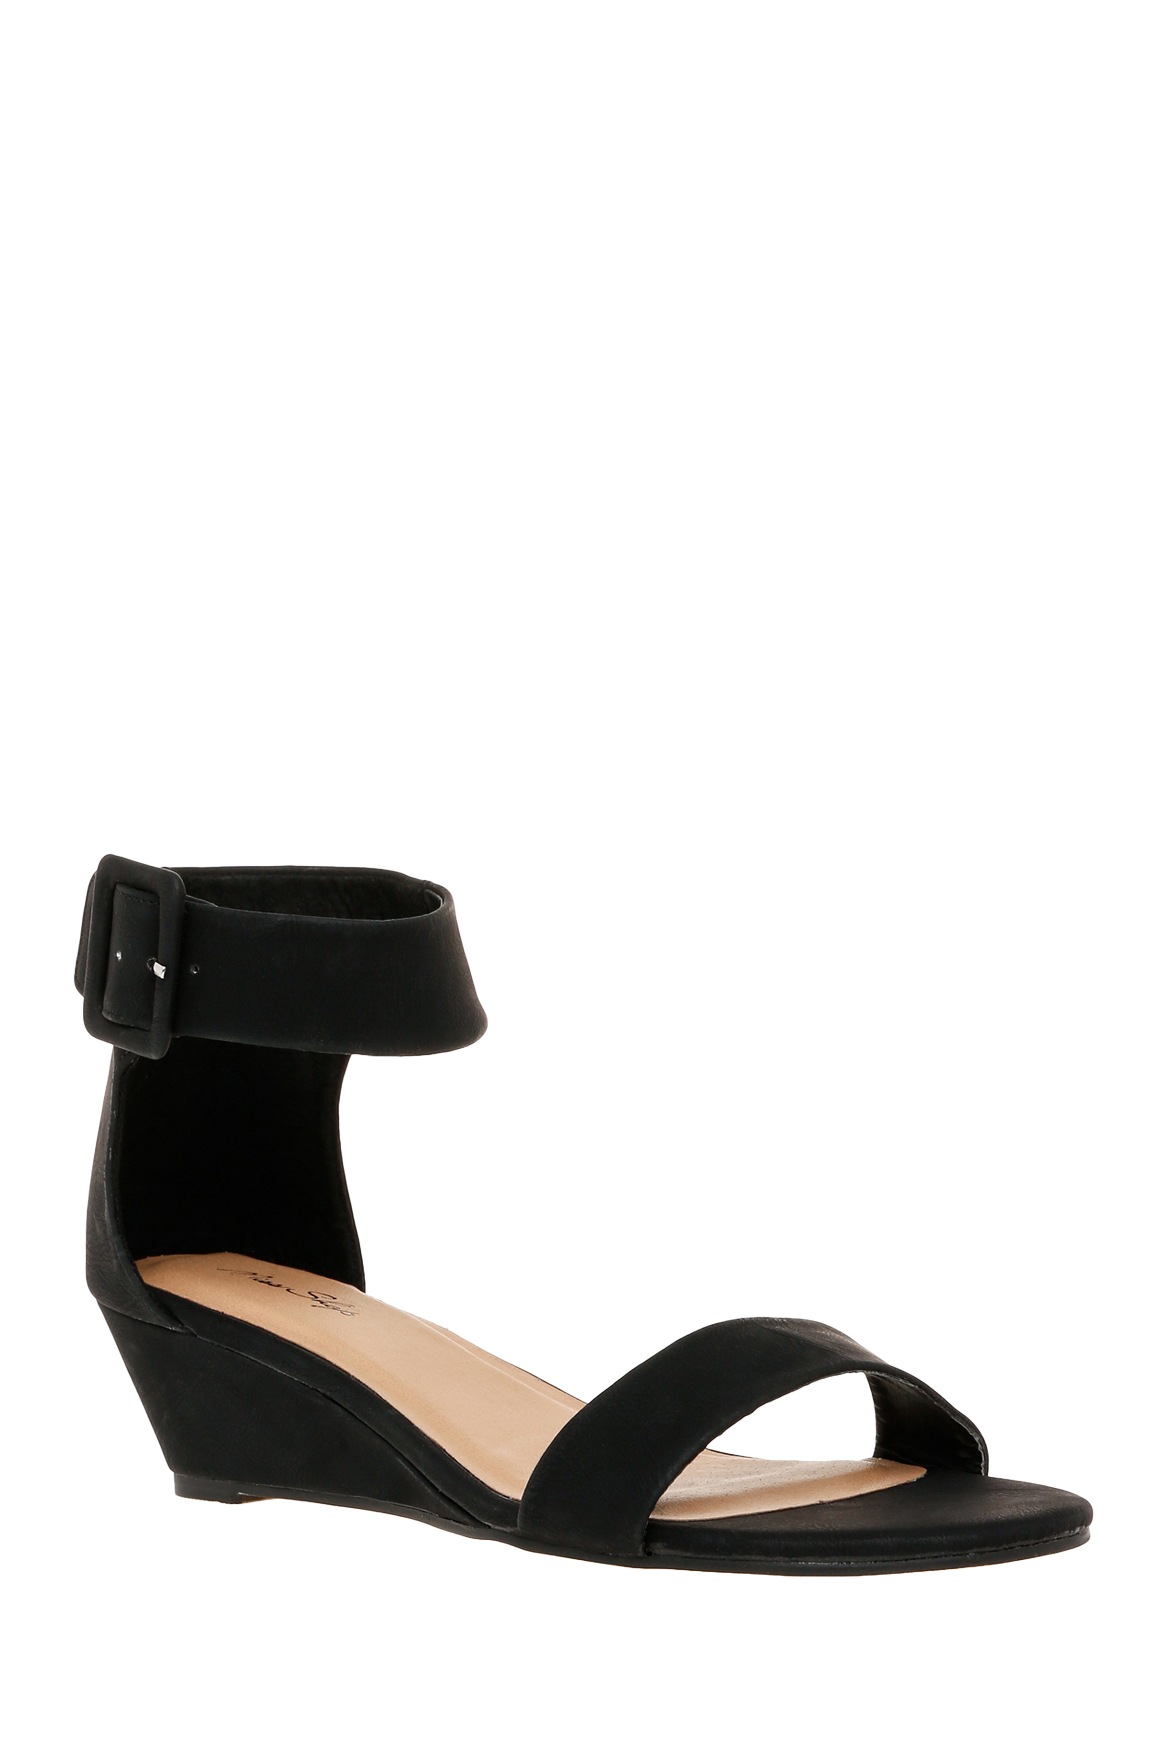 36+ Wedge Shoes Myer Pictures - Fashion bazar